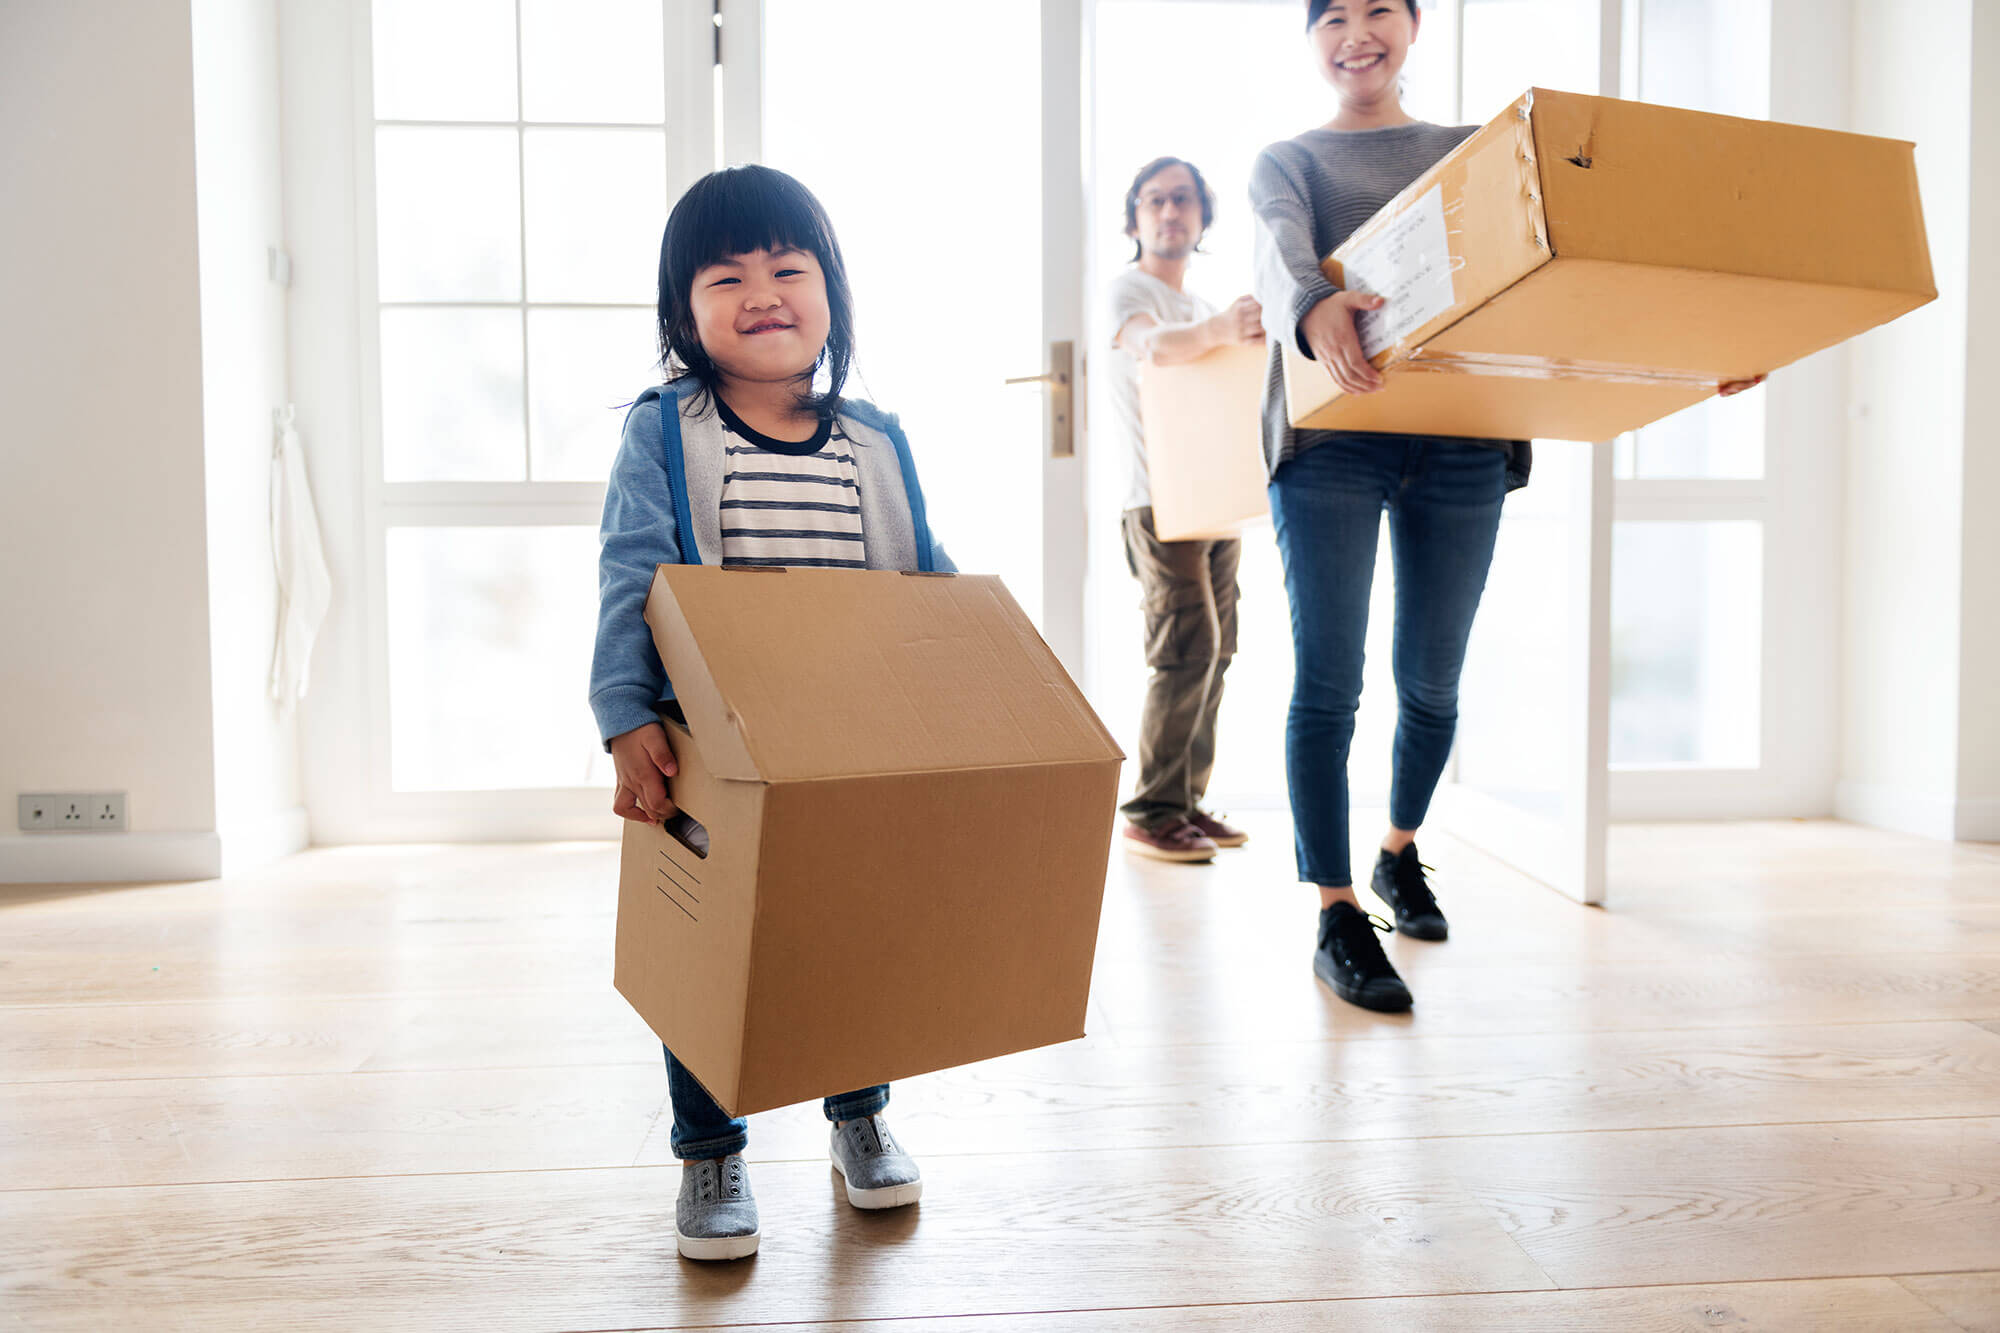 Single moms have become a force to be reckoned with in the property market. Developers who want their estates to appeal to this growing demographic will need to keep in mind factors such as security, open spaces, schools and modern living units.